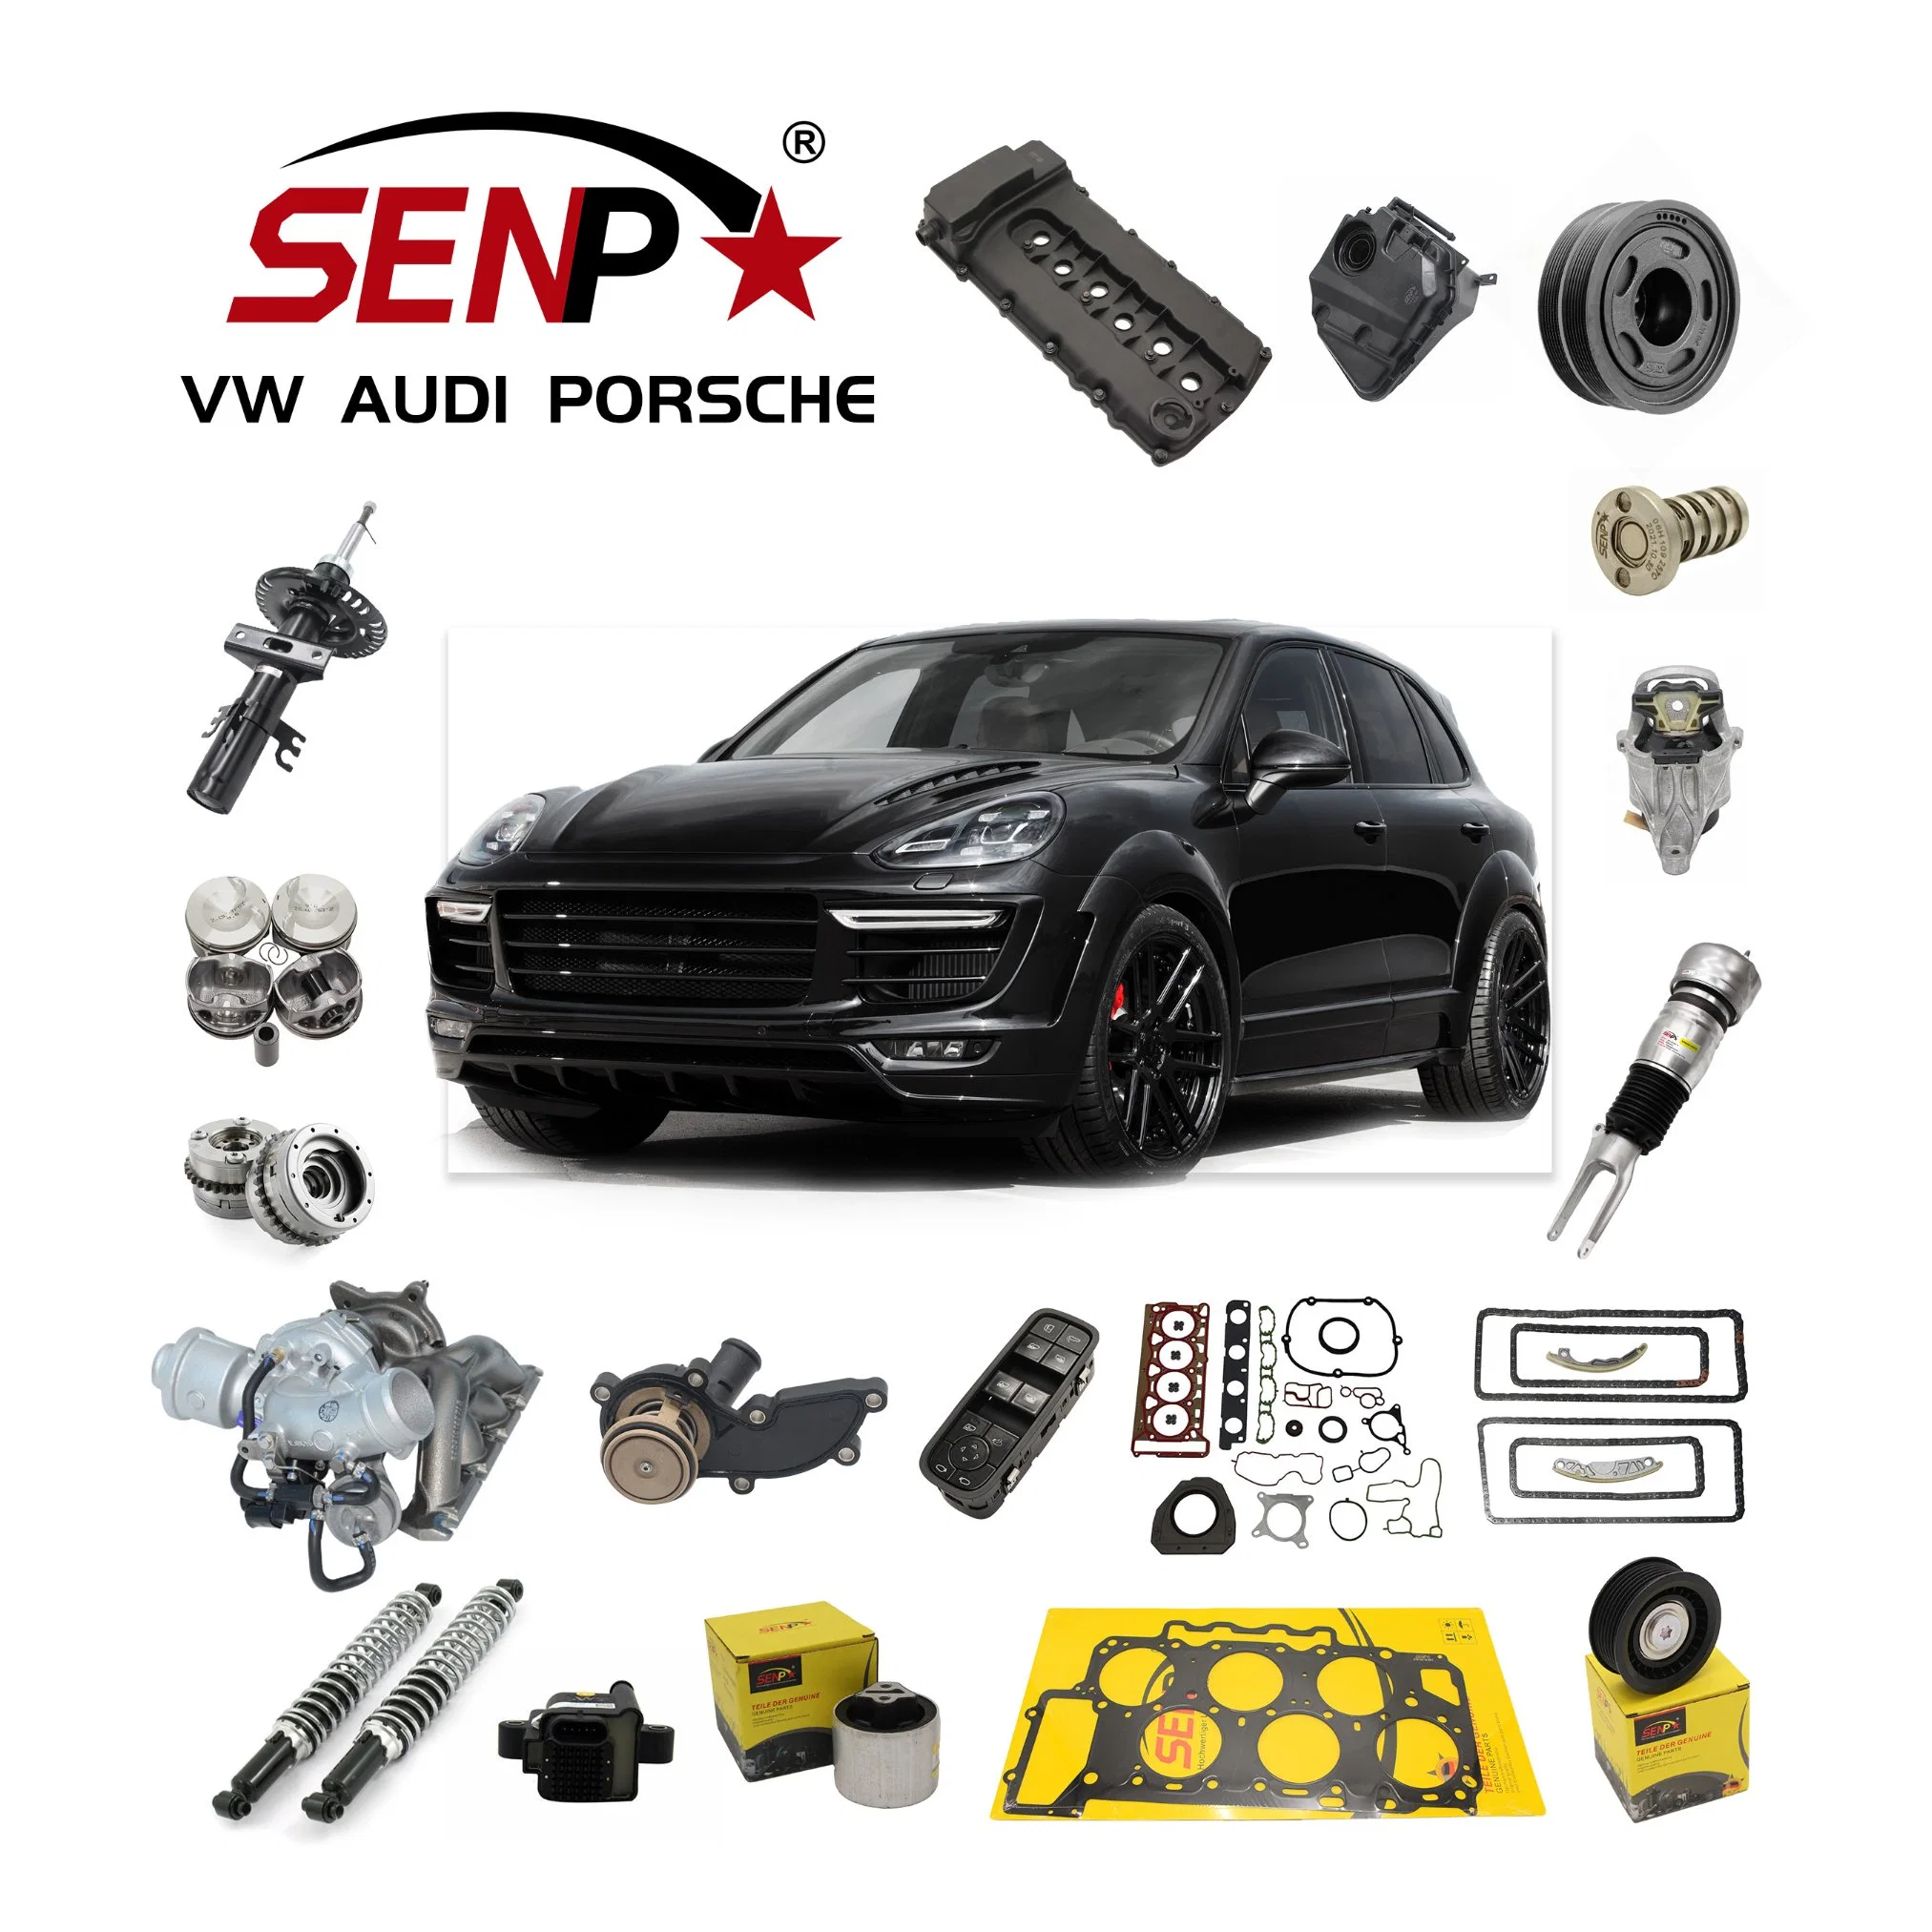 Senp High quality/High cost performance  All Germany Car Other Body Auto Parts Automotive Engine Spare Part Accessories for Audi VW Porsche Auto Parts